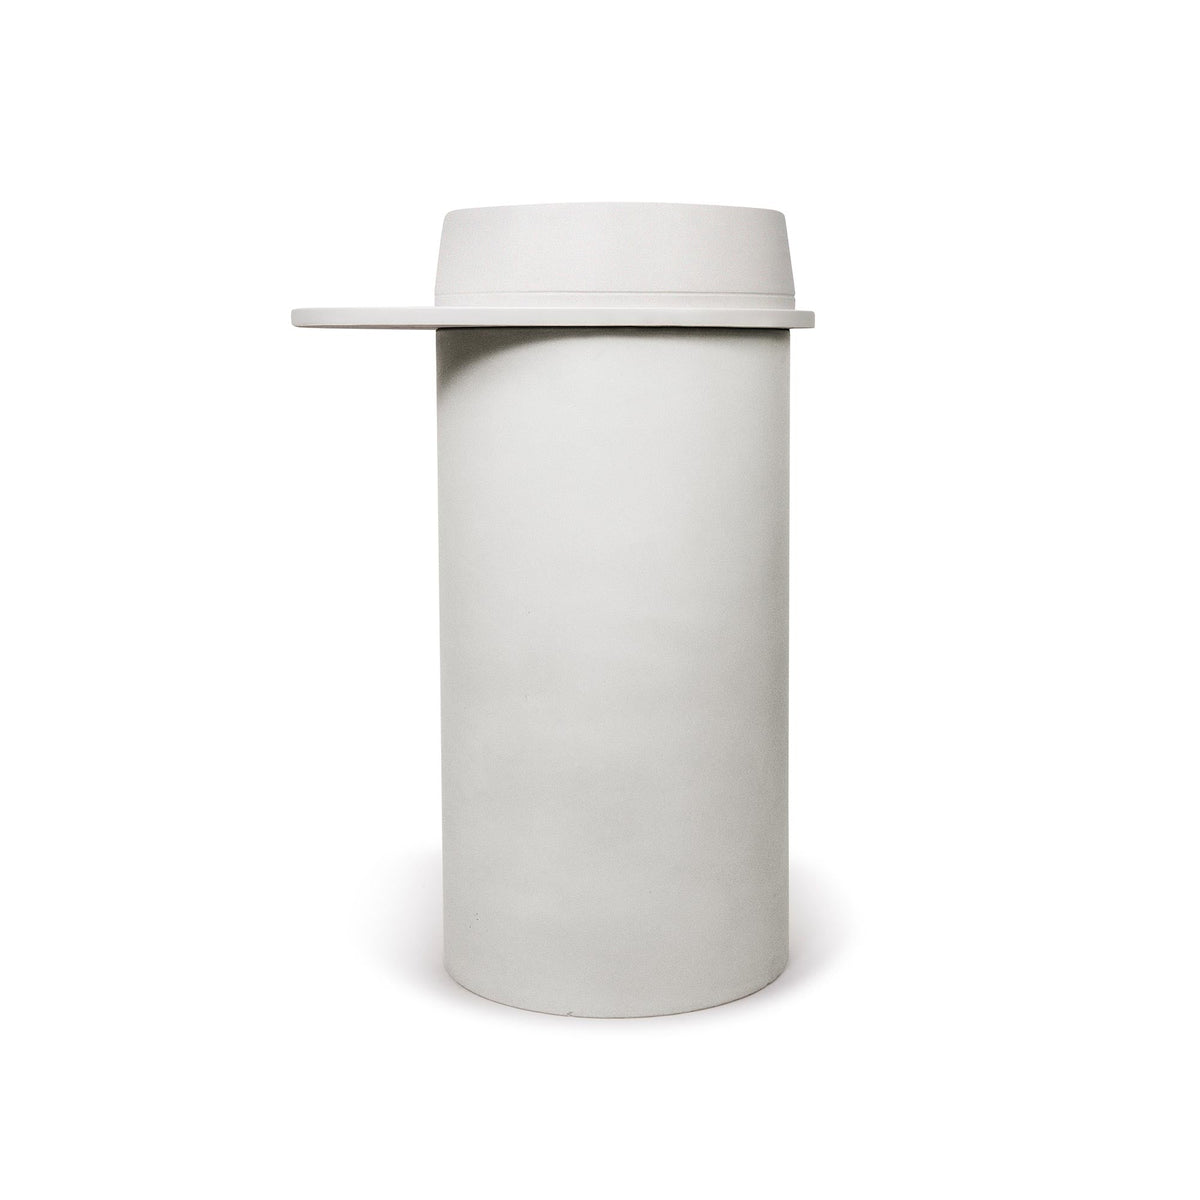 Cylinder with Tray - Funl Basin (Sand,Pastel Peach)